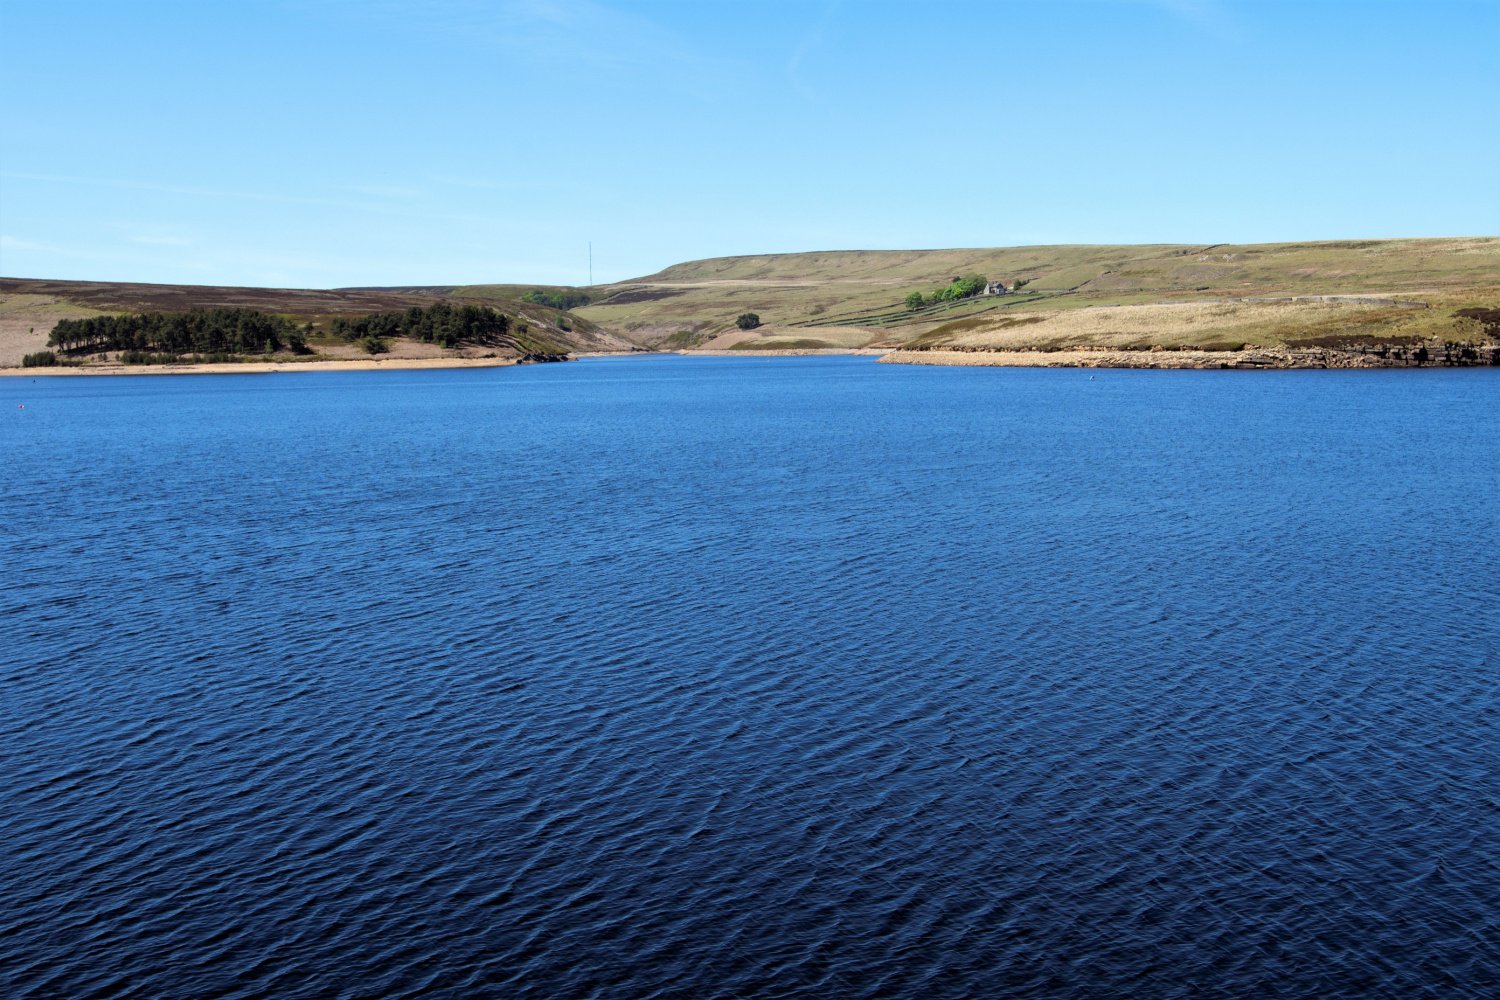 Image name winscar reservoir sheffield south yorkshire the 21 image from the post Walk: Winscar Reservoir in Yorkshire.com.